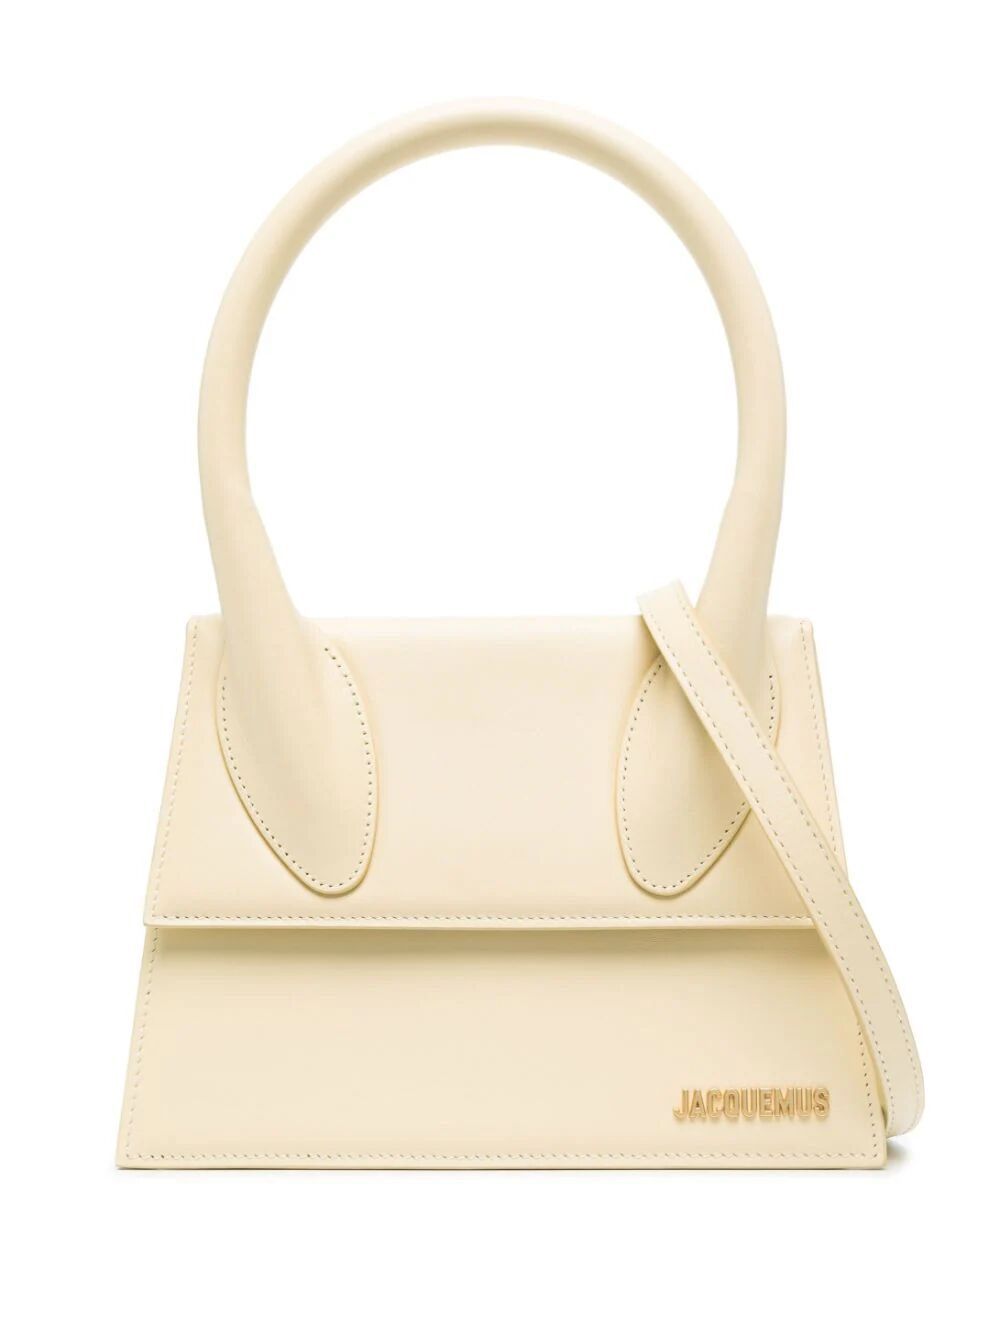 JACQUEMUS Chic White Leather Top-Handle Bag for Women